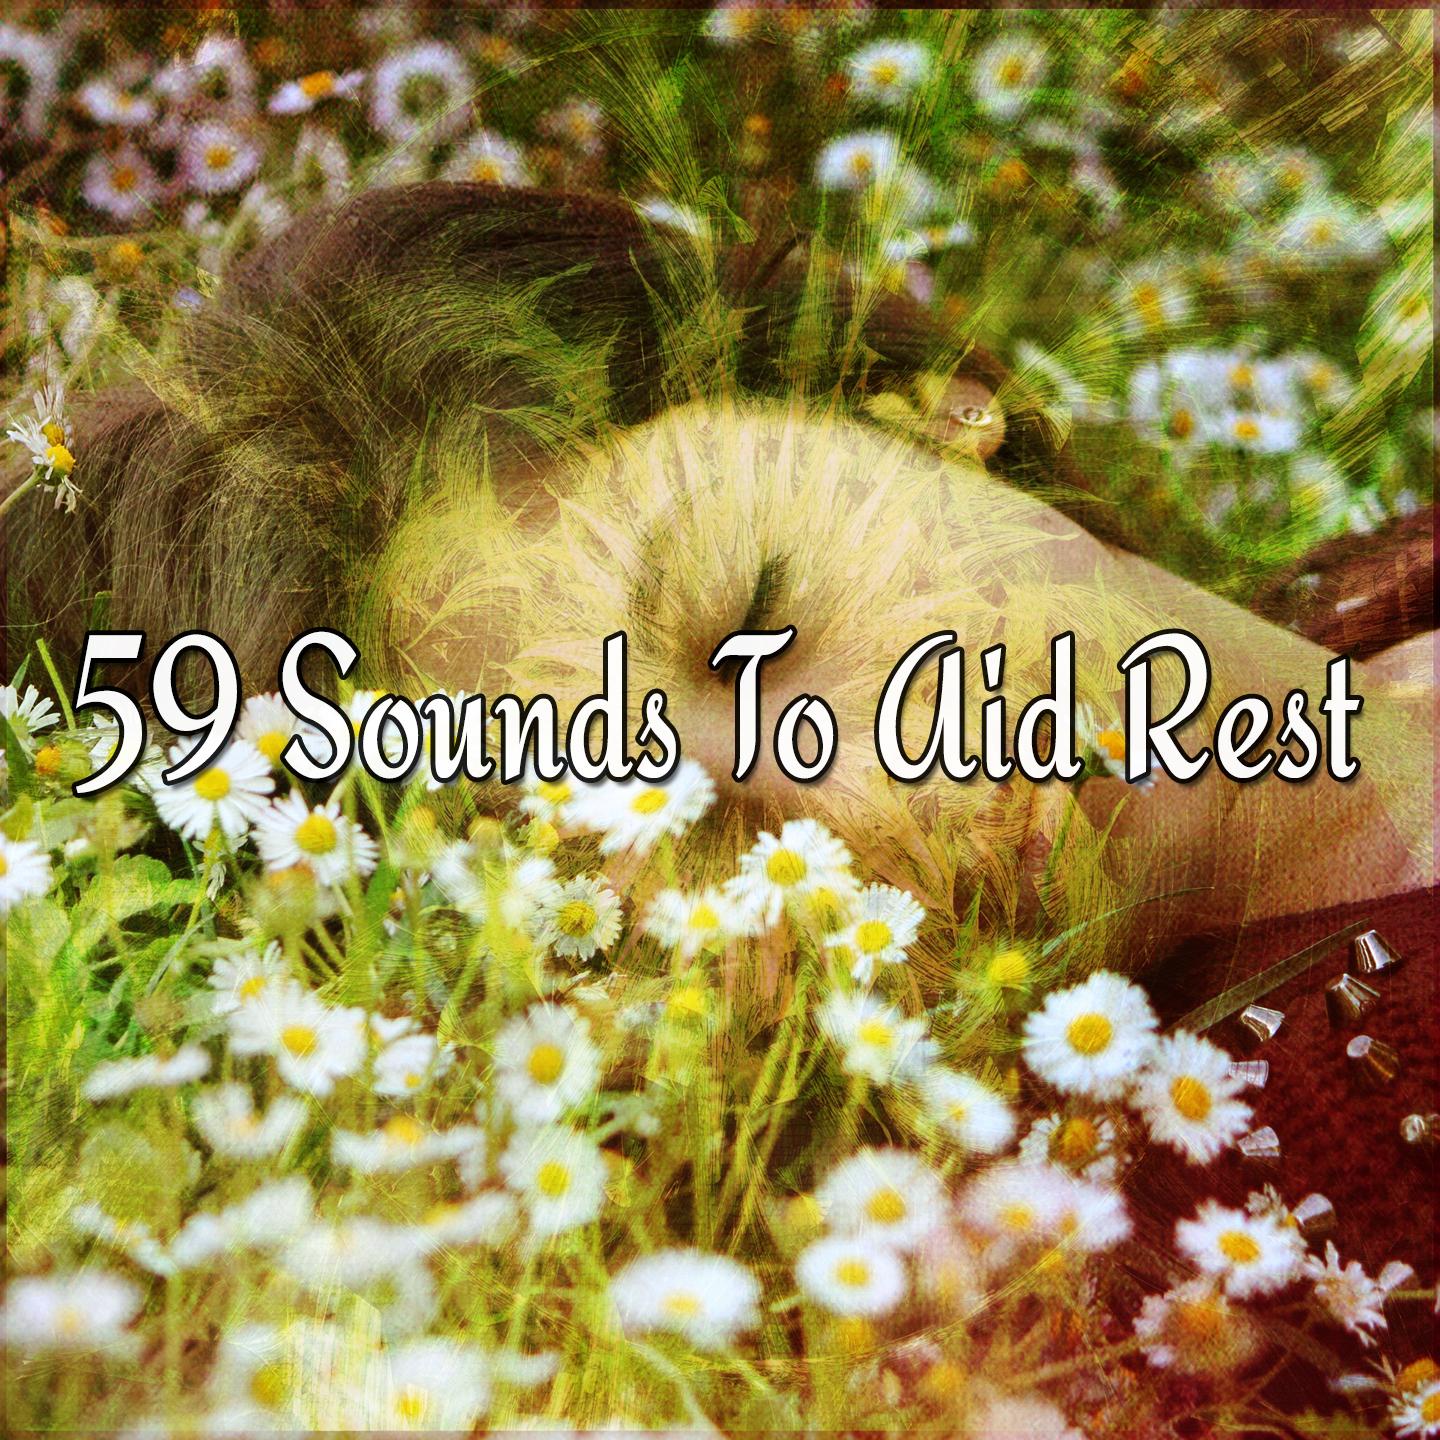 59 Sounds To Aid Rest